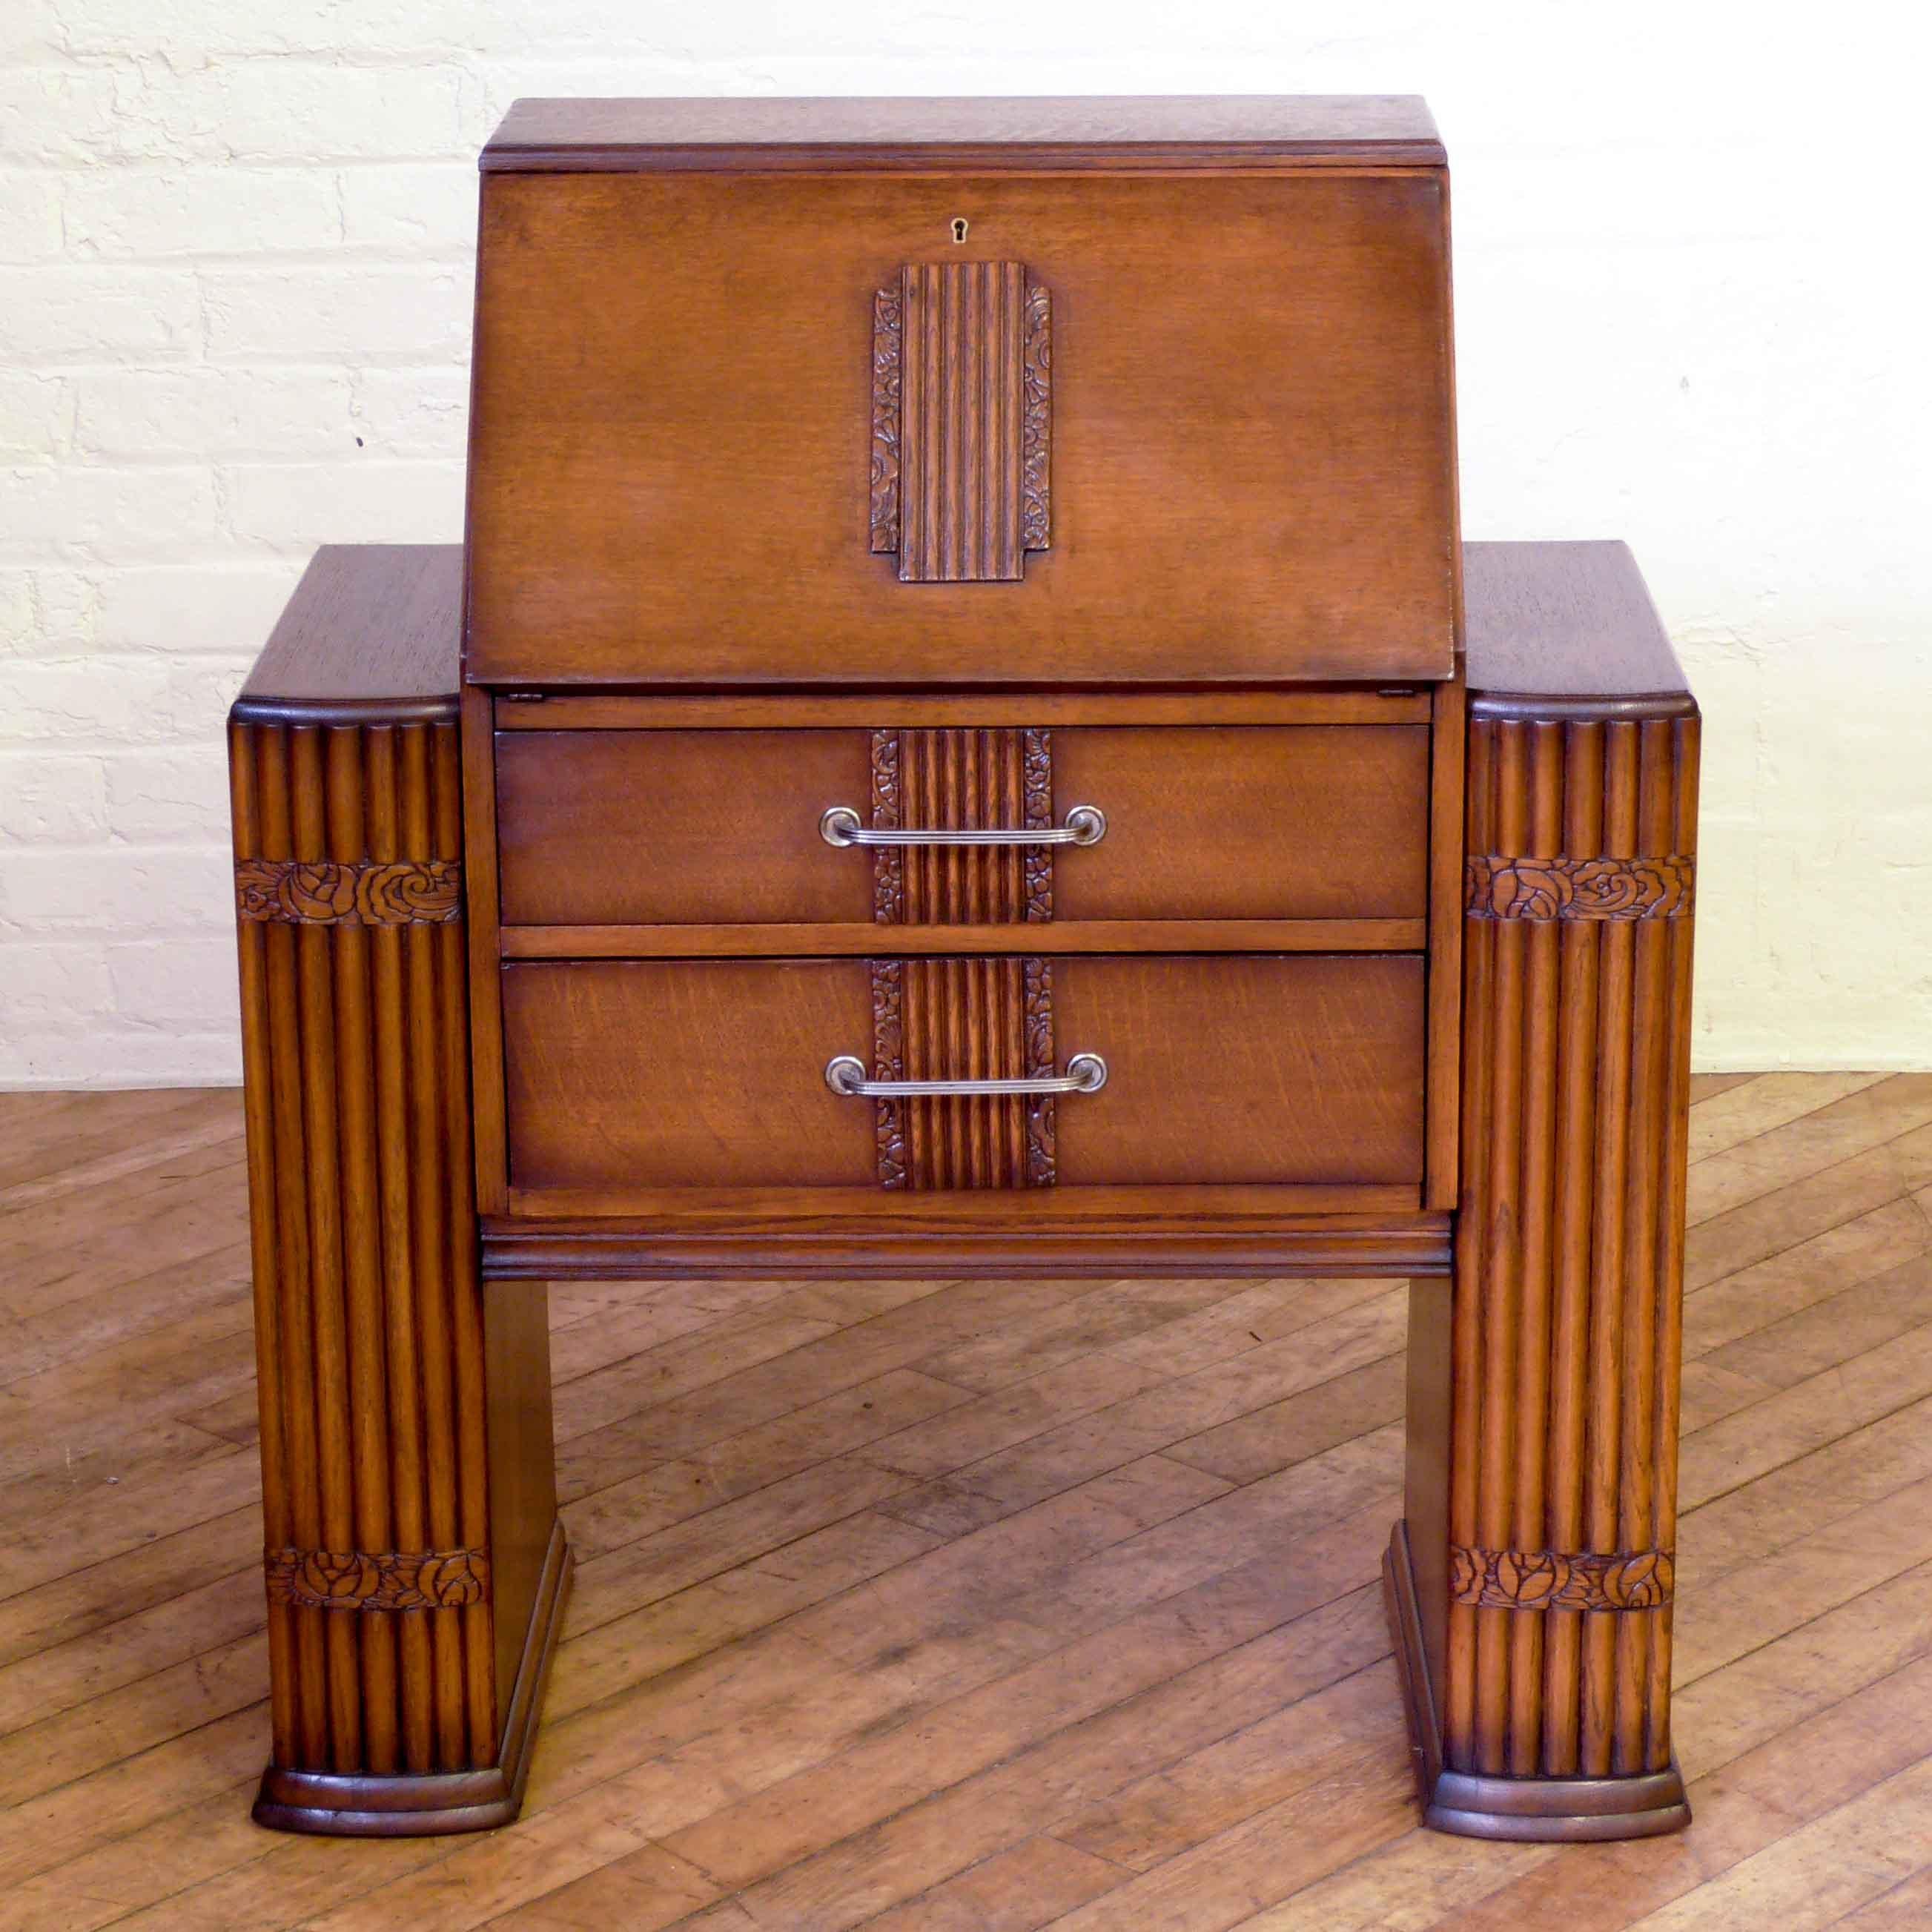 An Art Deco oak bureau of unusual design, with side bookcases. The fluted side pilasters are slightly bowed, typical of the Art Deco period as are the applied carvings to the fall and drawer fronts. Nice to see the original steel handles and working